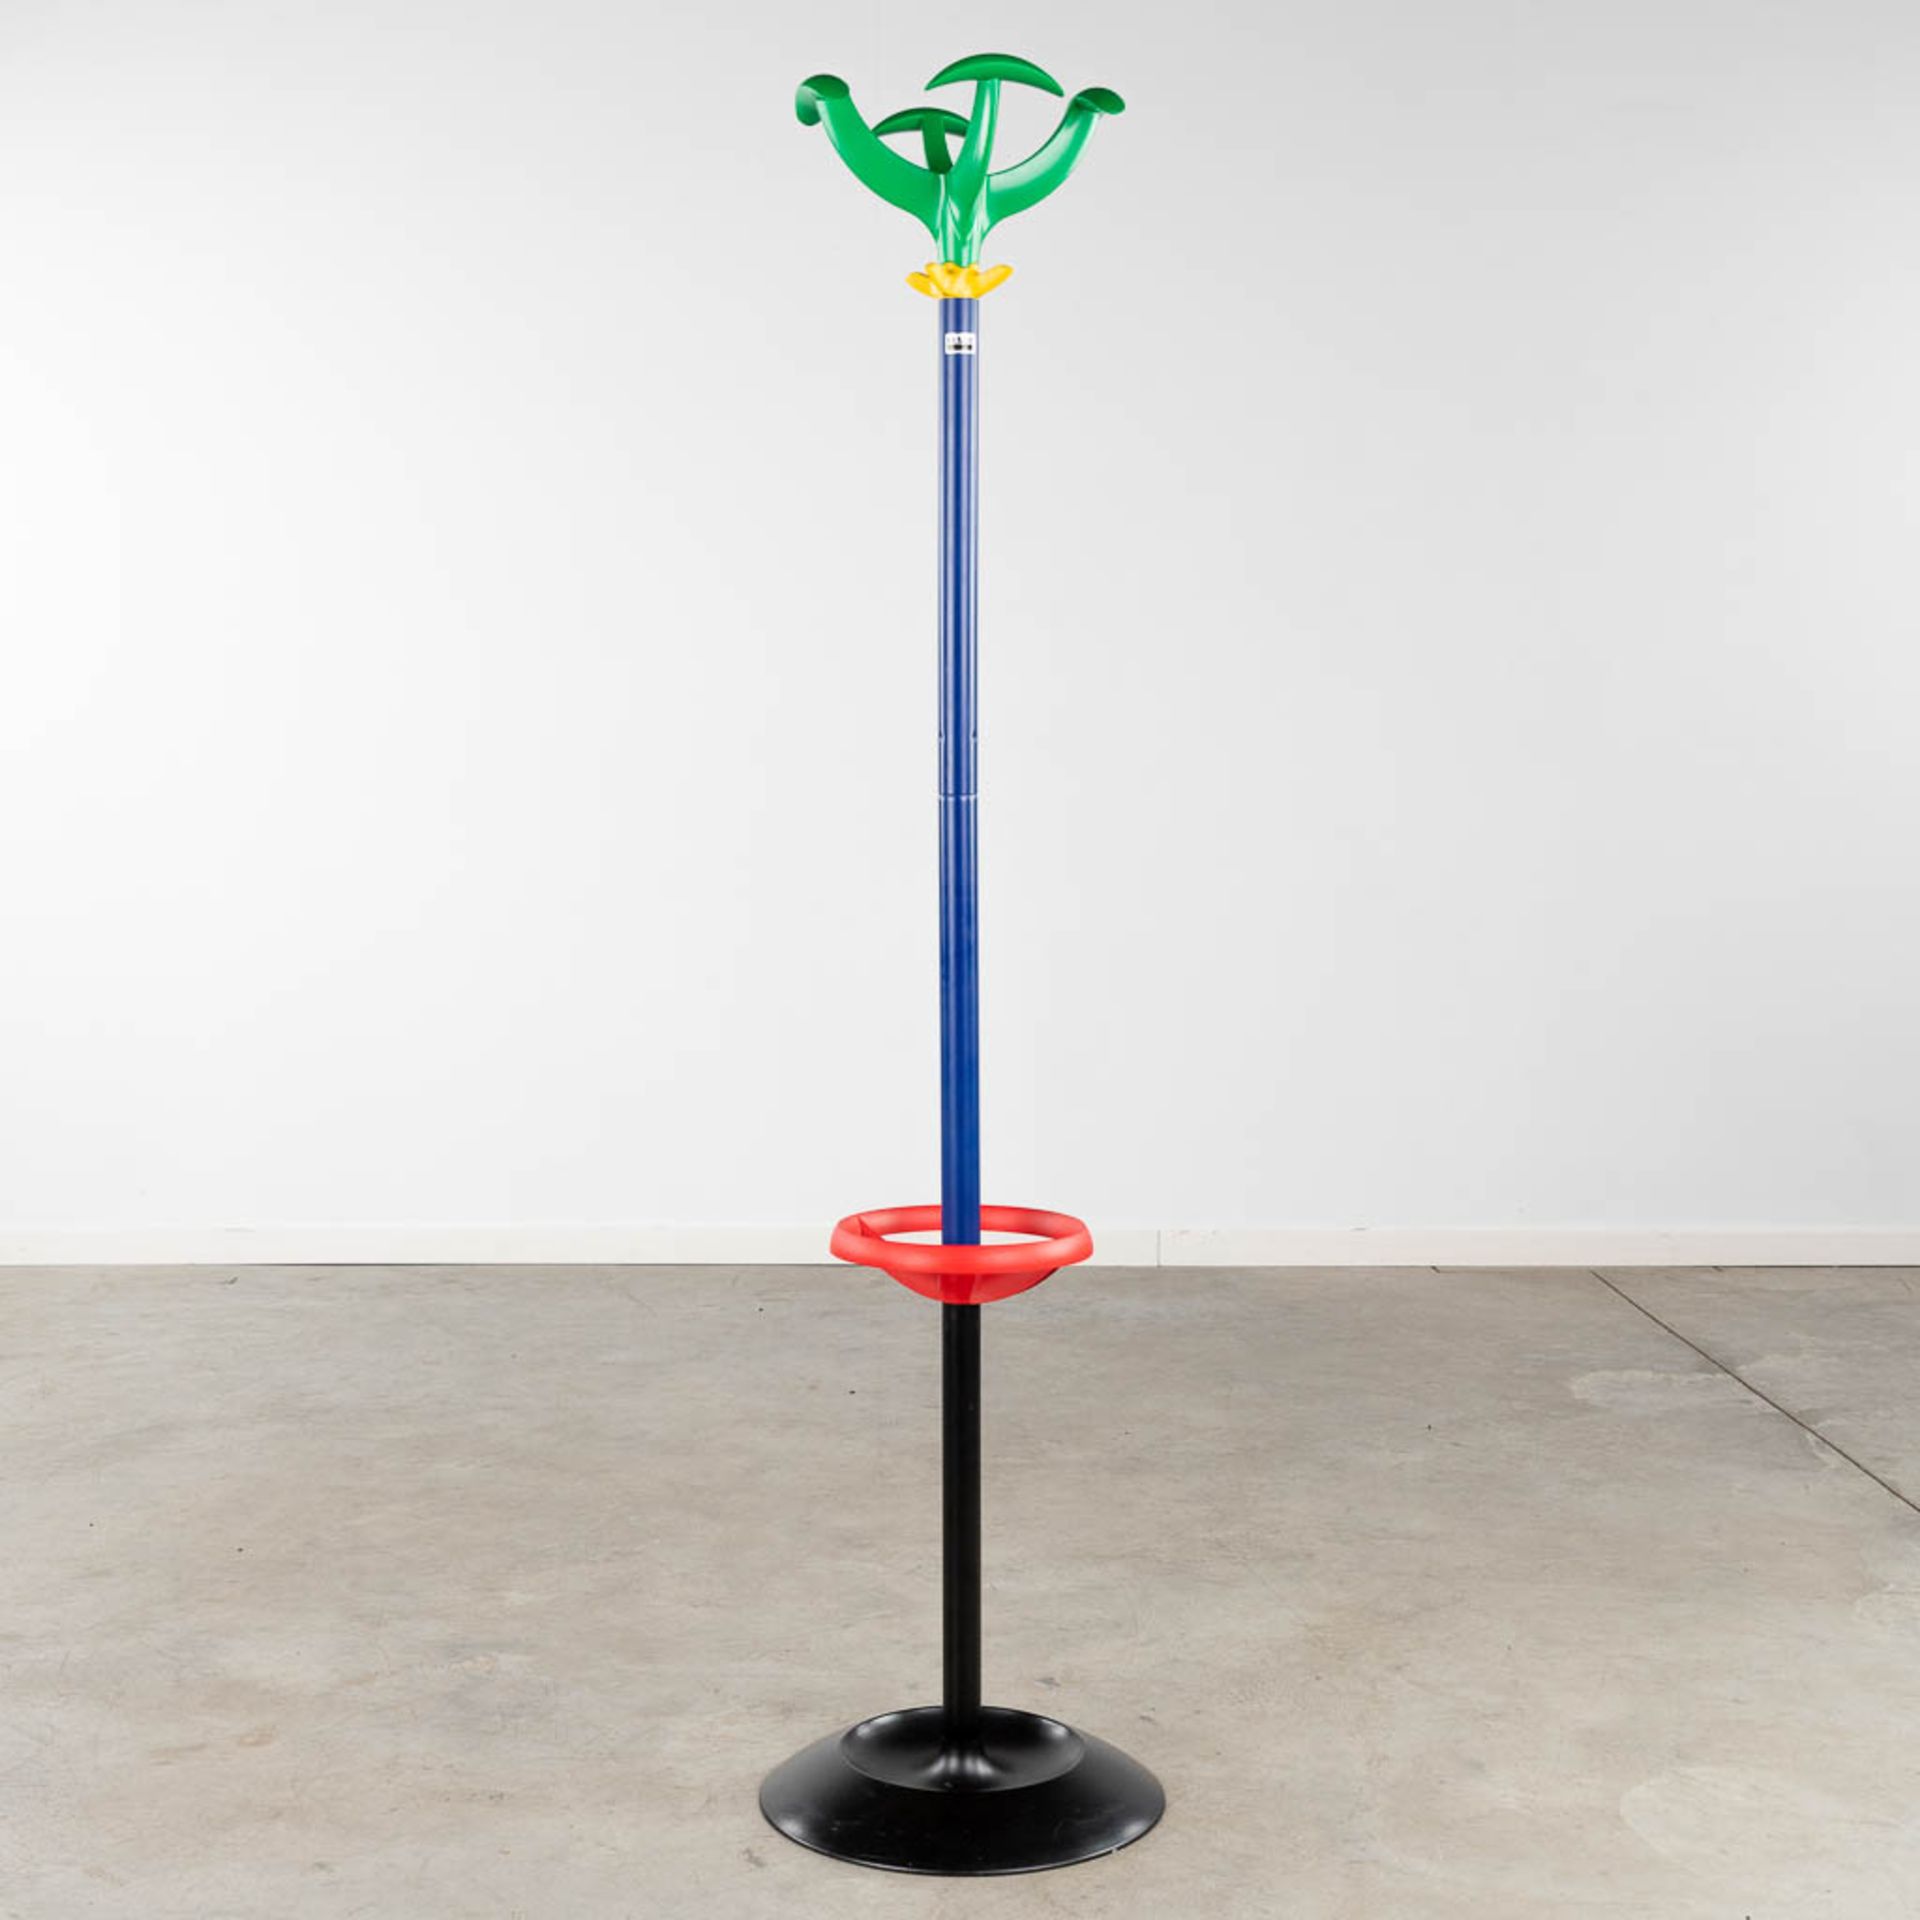 Raul BARBIERI (1946) 'Cactus' for Rexite, a coathanger. (H:165 x D:40 cm) - Image 3 of 13